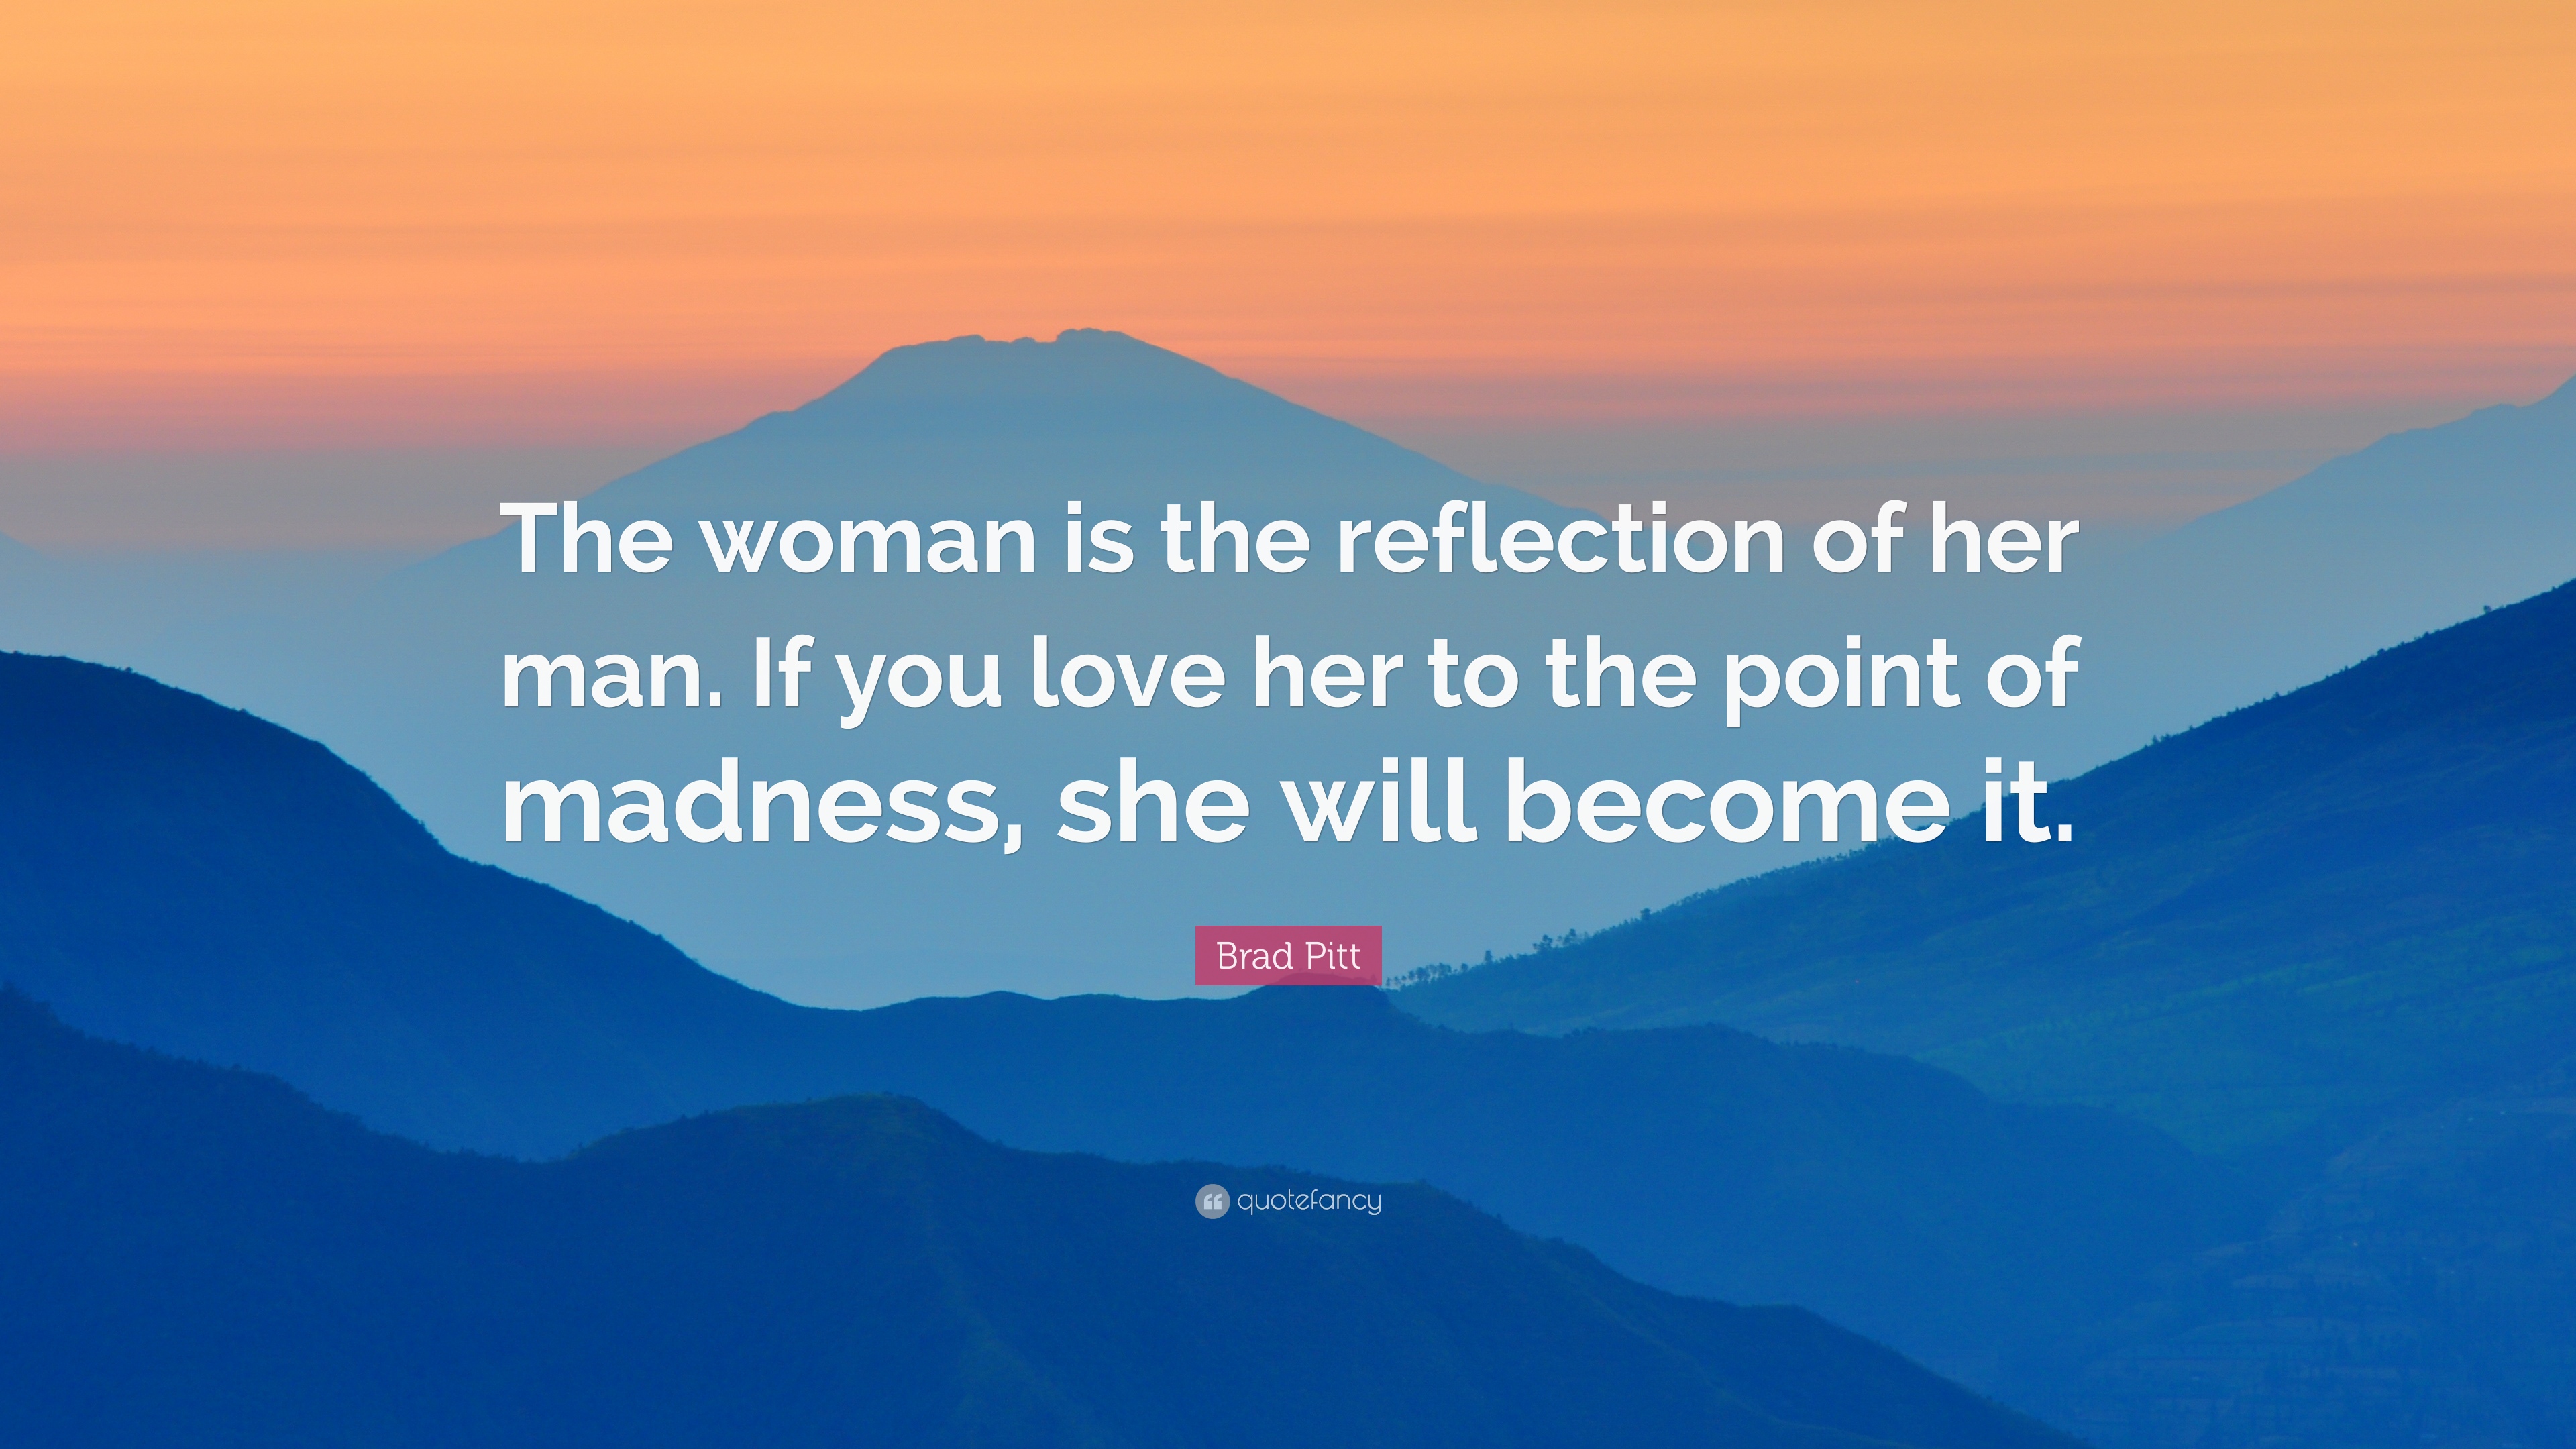 Brad Pitt Quote: “The woman is the reflection of her man. If you ...